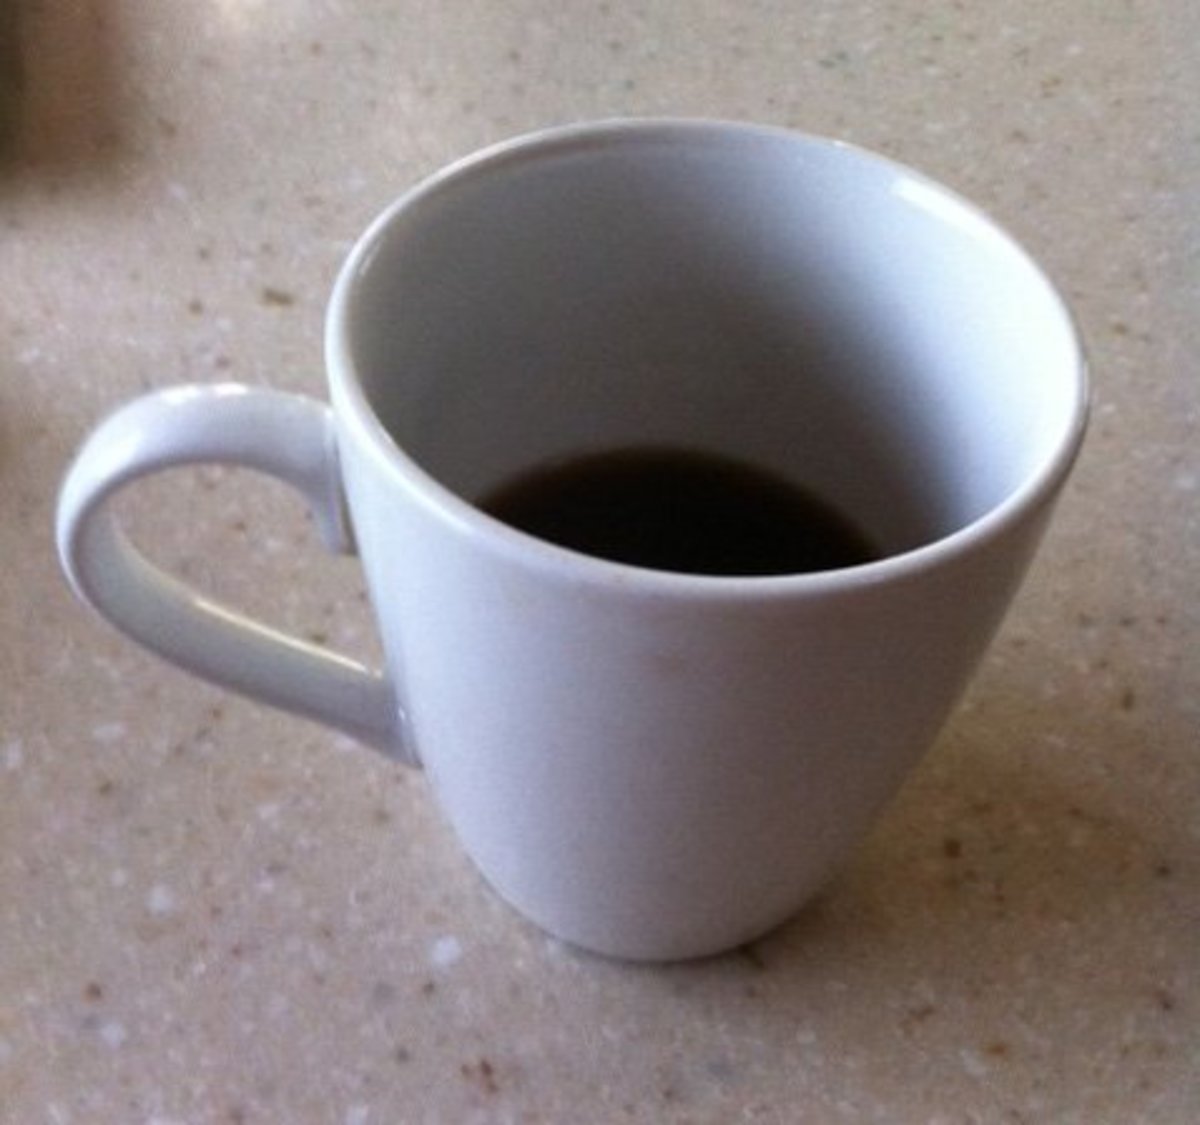 Coffee Cup with coffee in it.